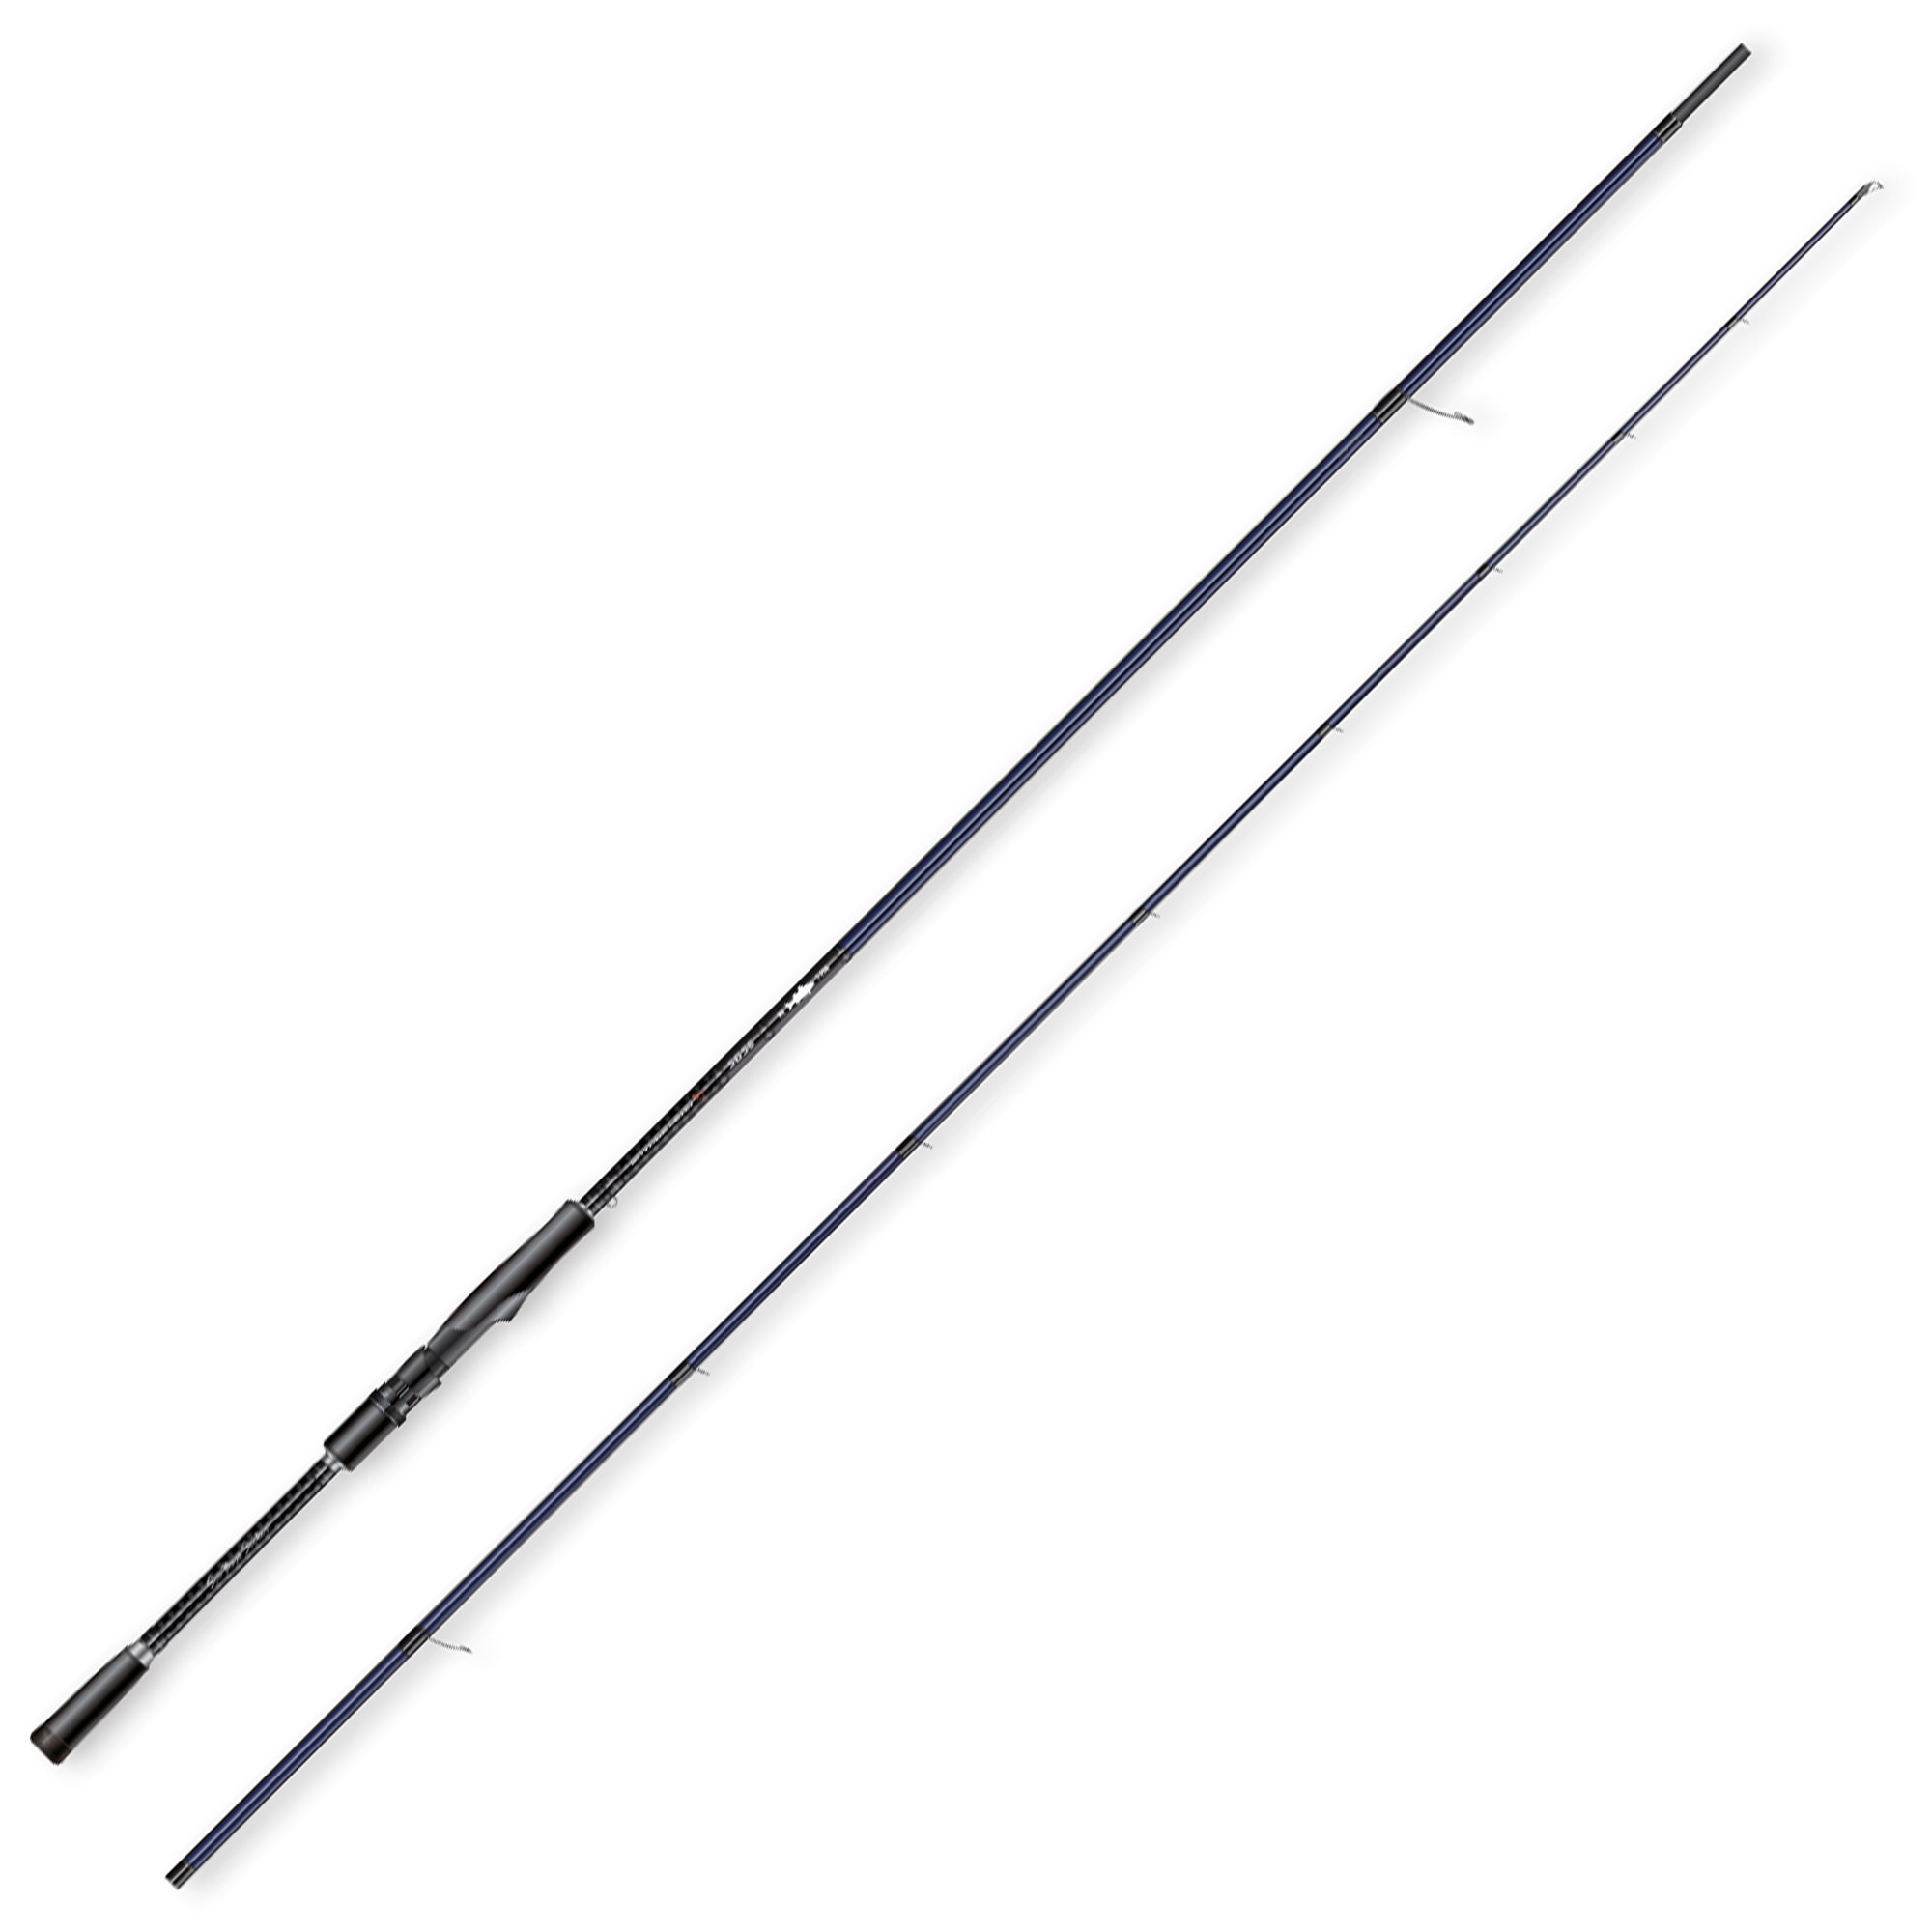 SGS6 Topwater & Soft lure 7ft7 XF Rod 2pc